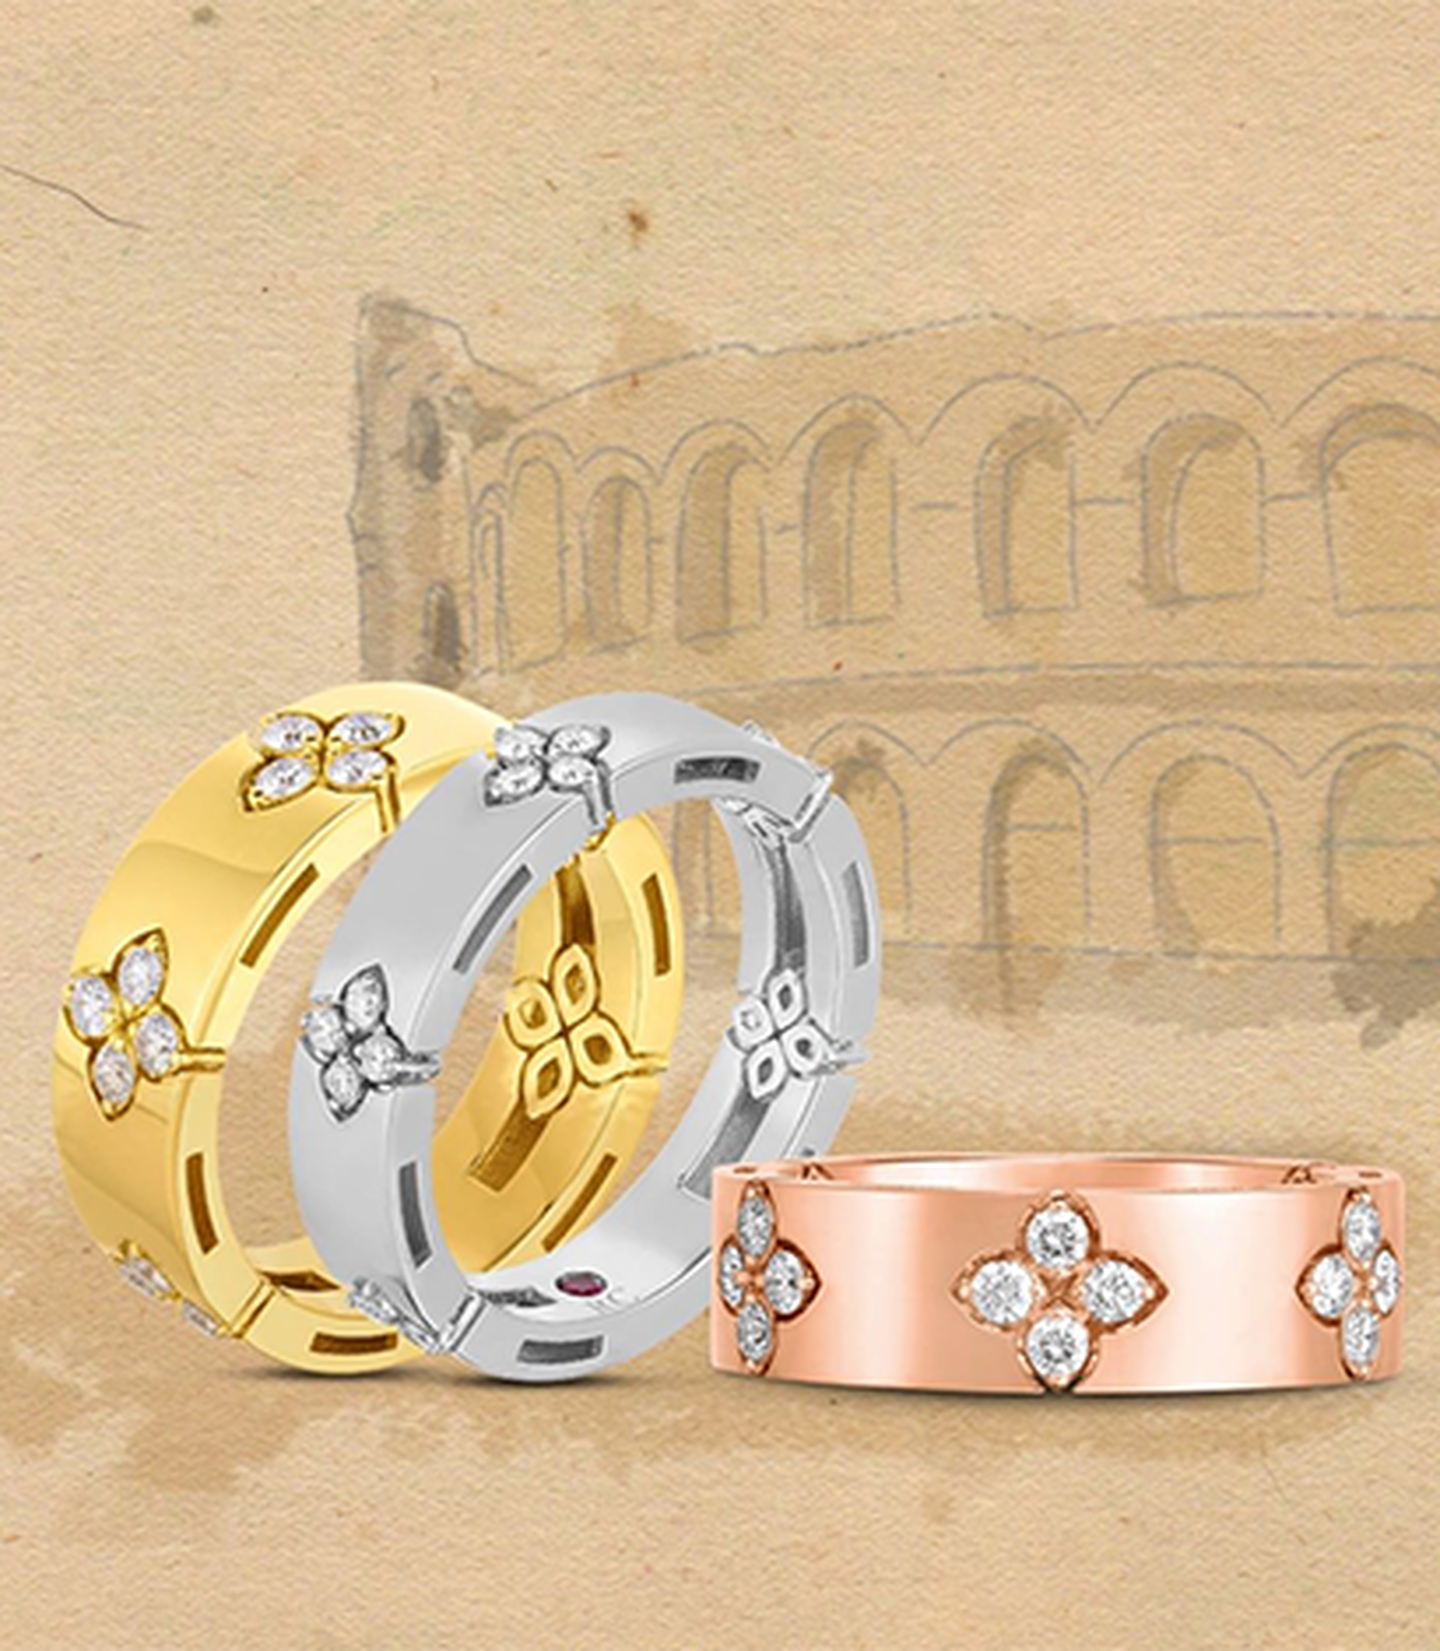 Three Roberto Coin yellow, white and rose gold rings with diamond flower accents